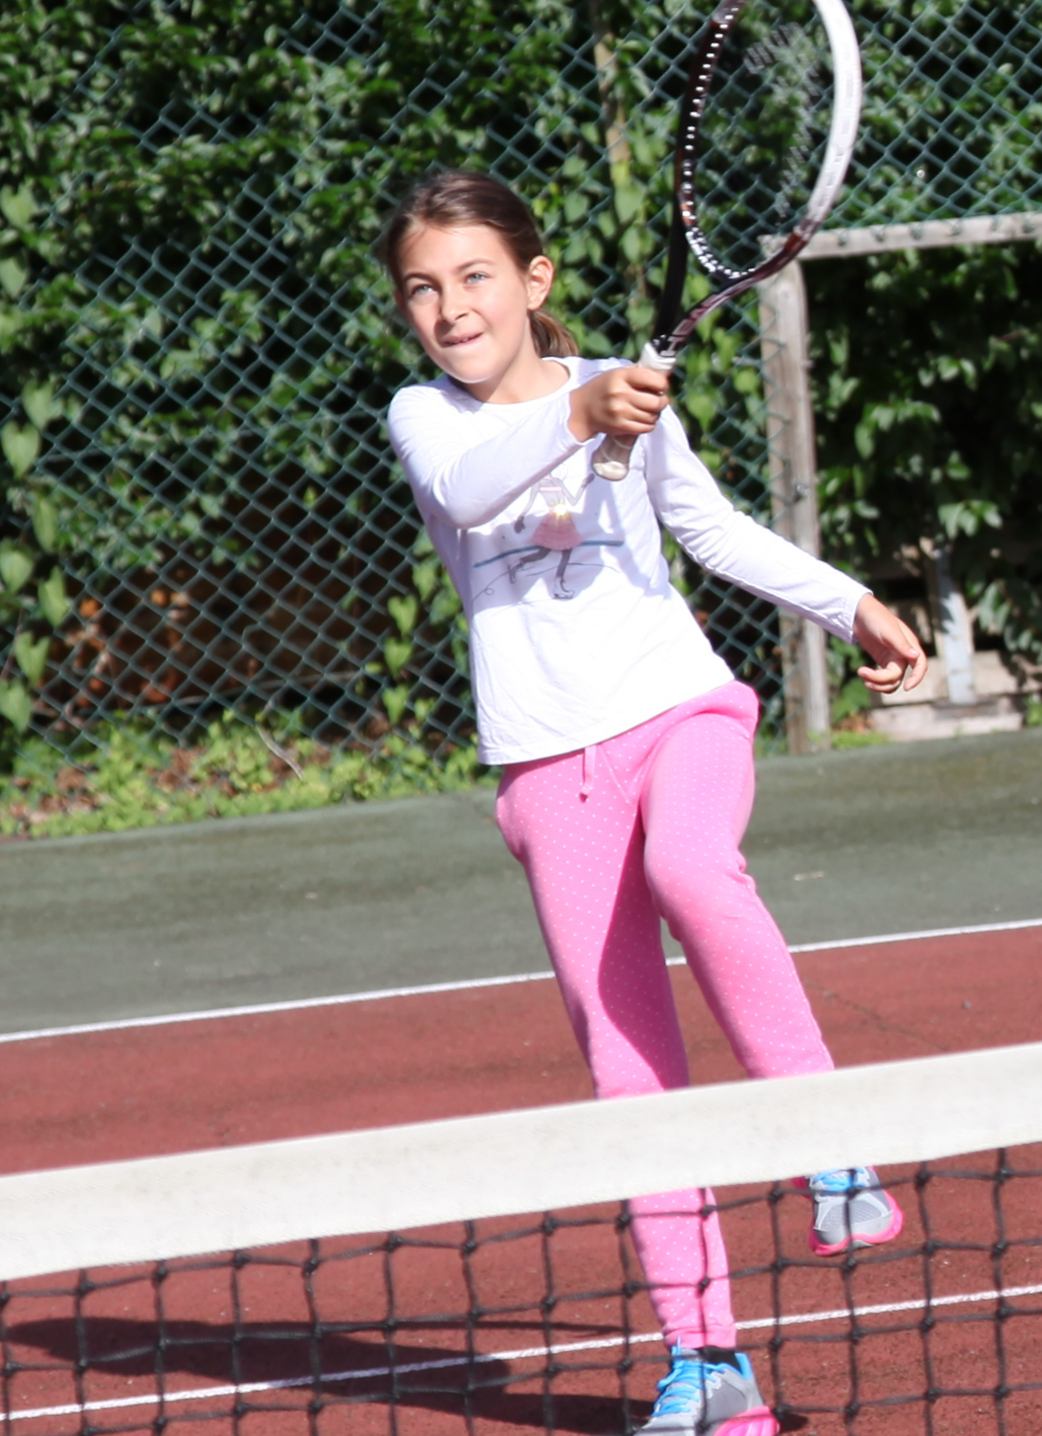 Attacking forehand